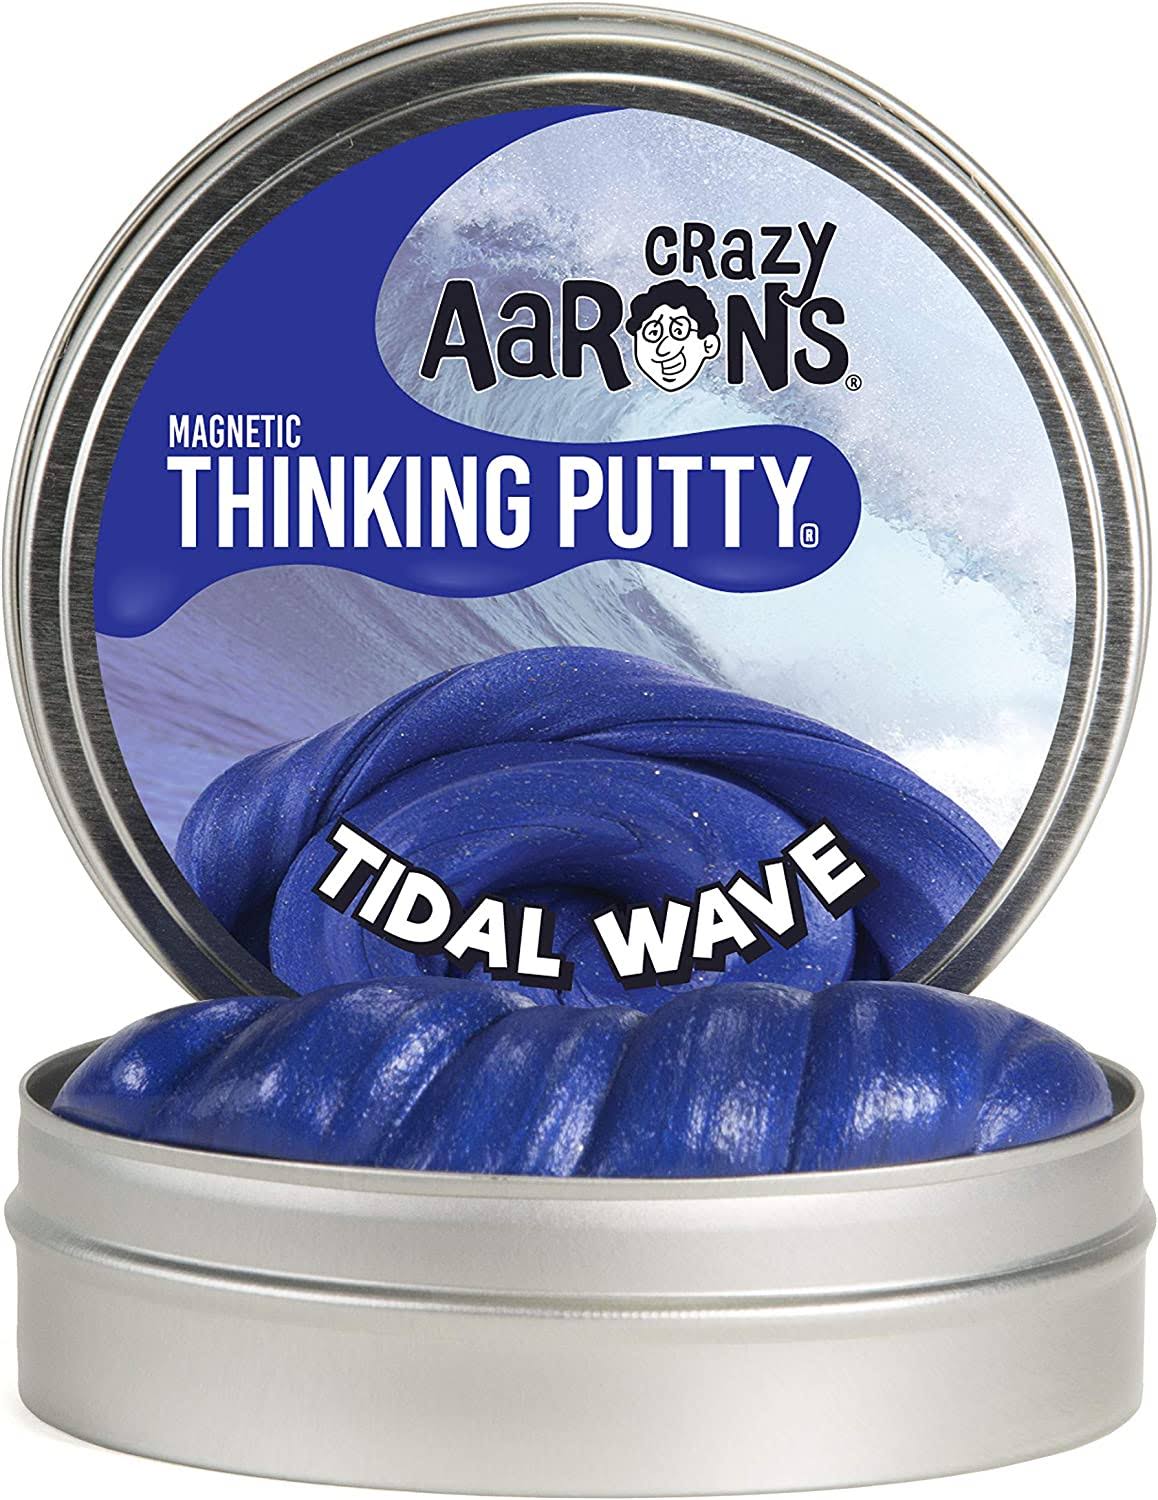 Crazy Aarons Thinking Putty - Super Magnetic Tidal Wave